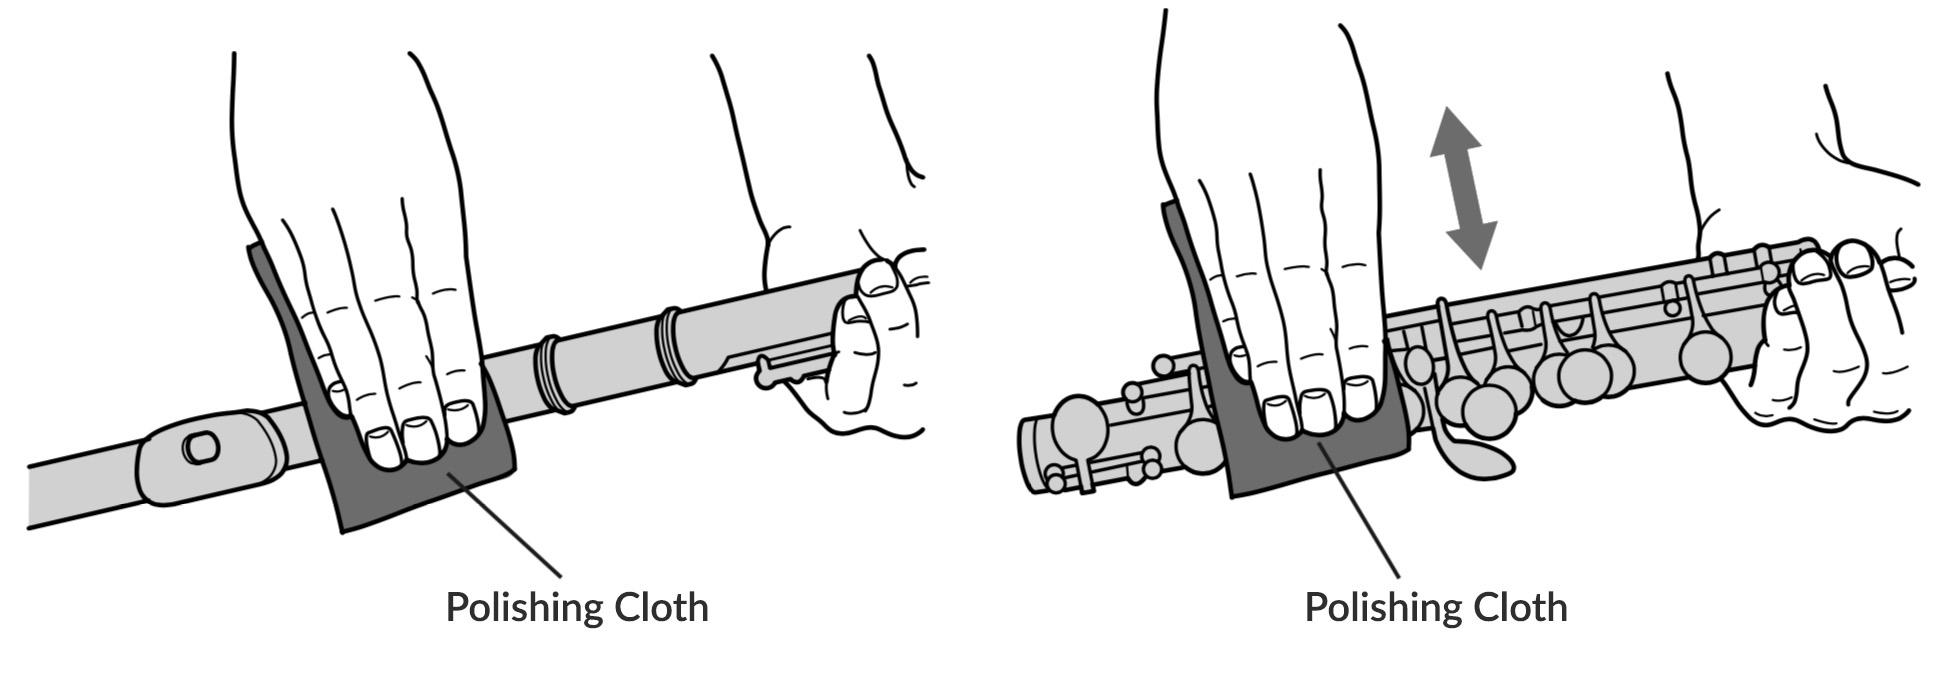 Removing dirt and residue from a flute's outer body using a polishing cloth